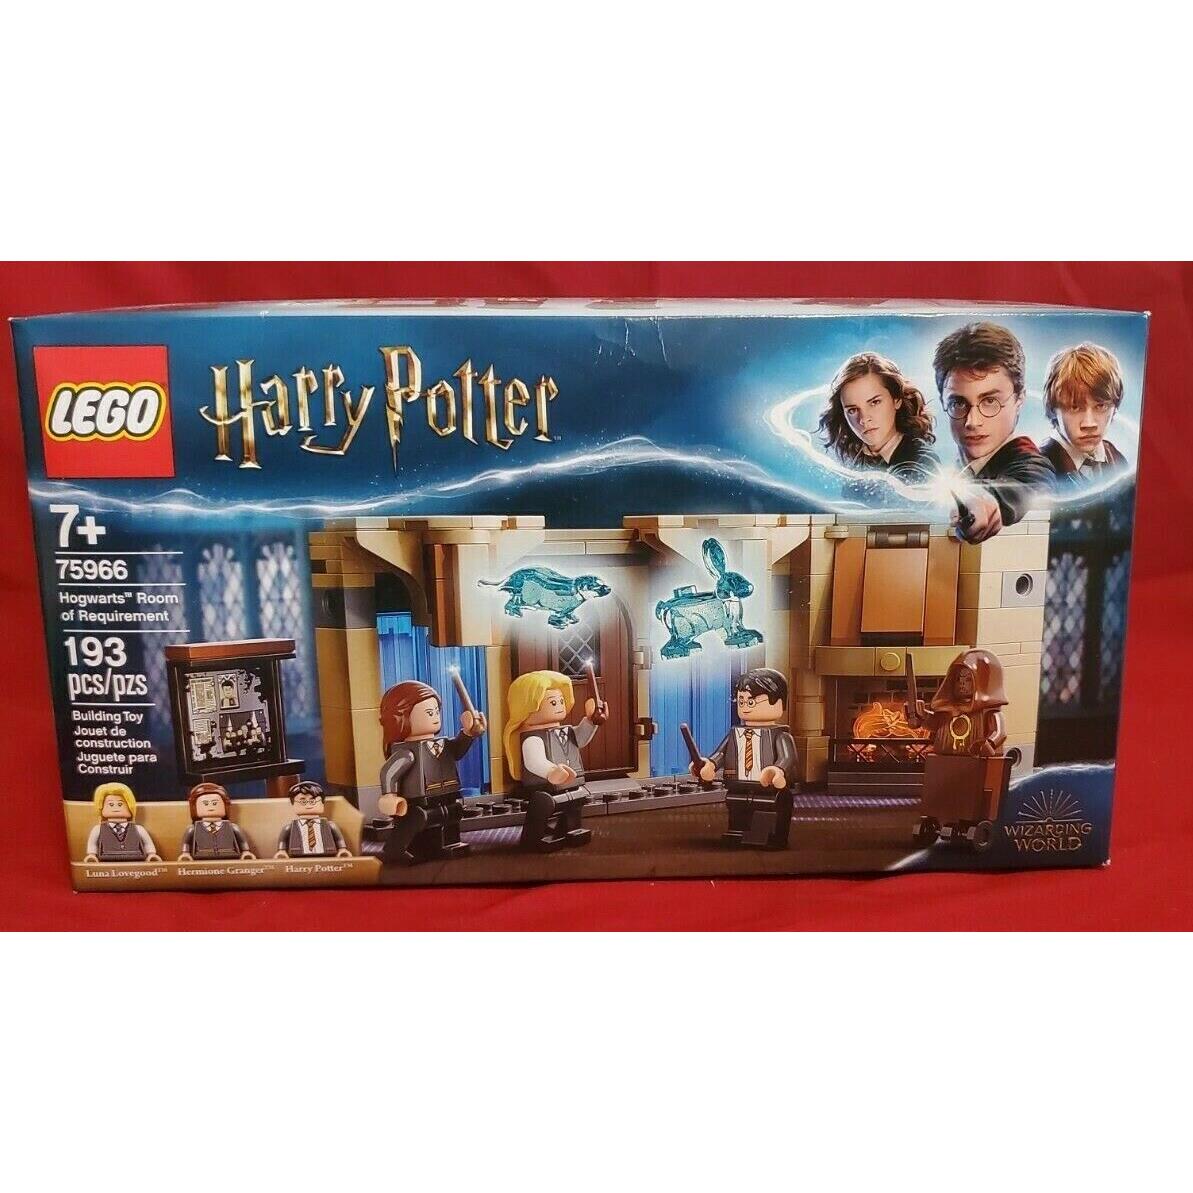 Lego Harry Potter Hogwarts Room of Requirement 75966 Retired